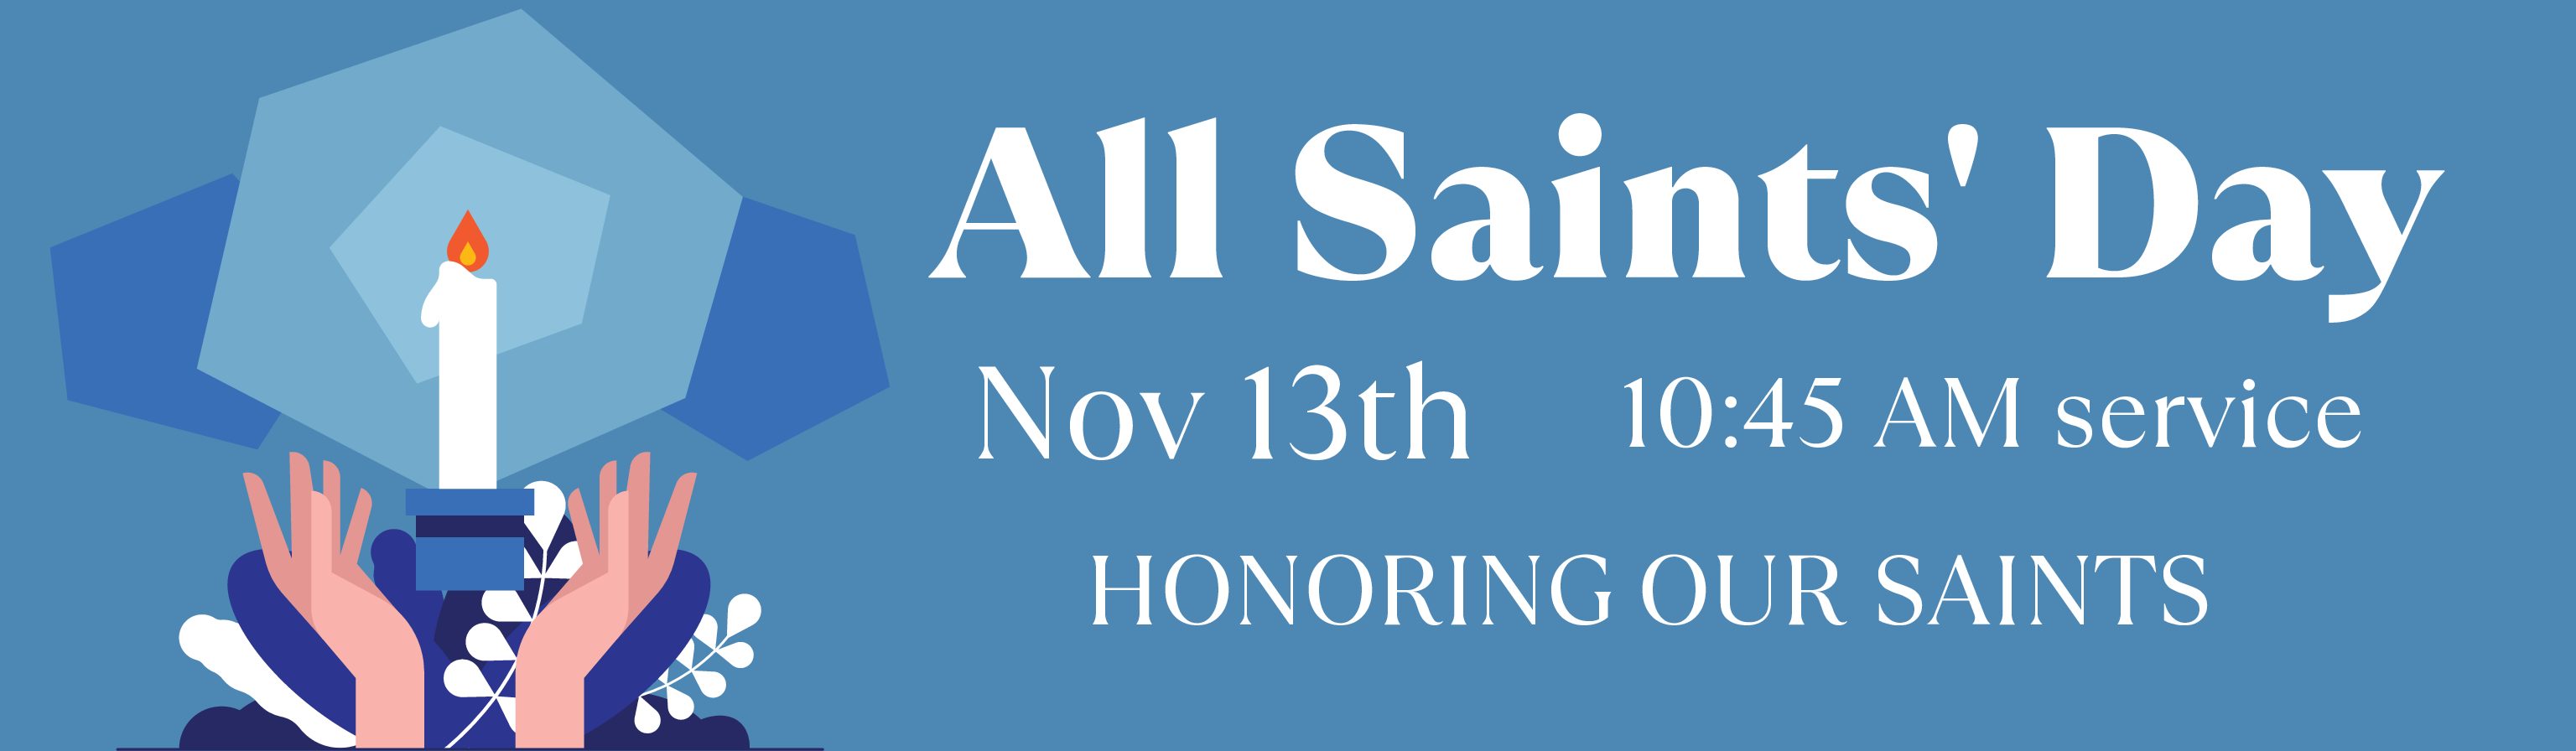 All Saints’ Day Banner